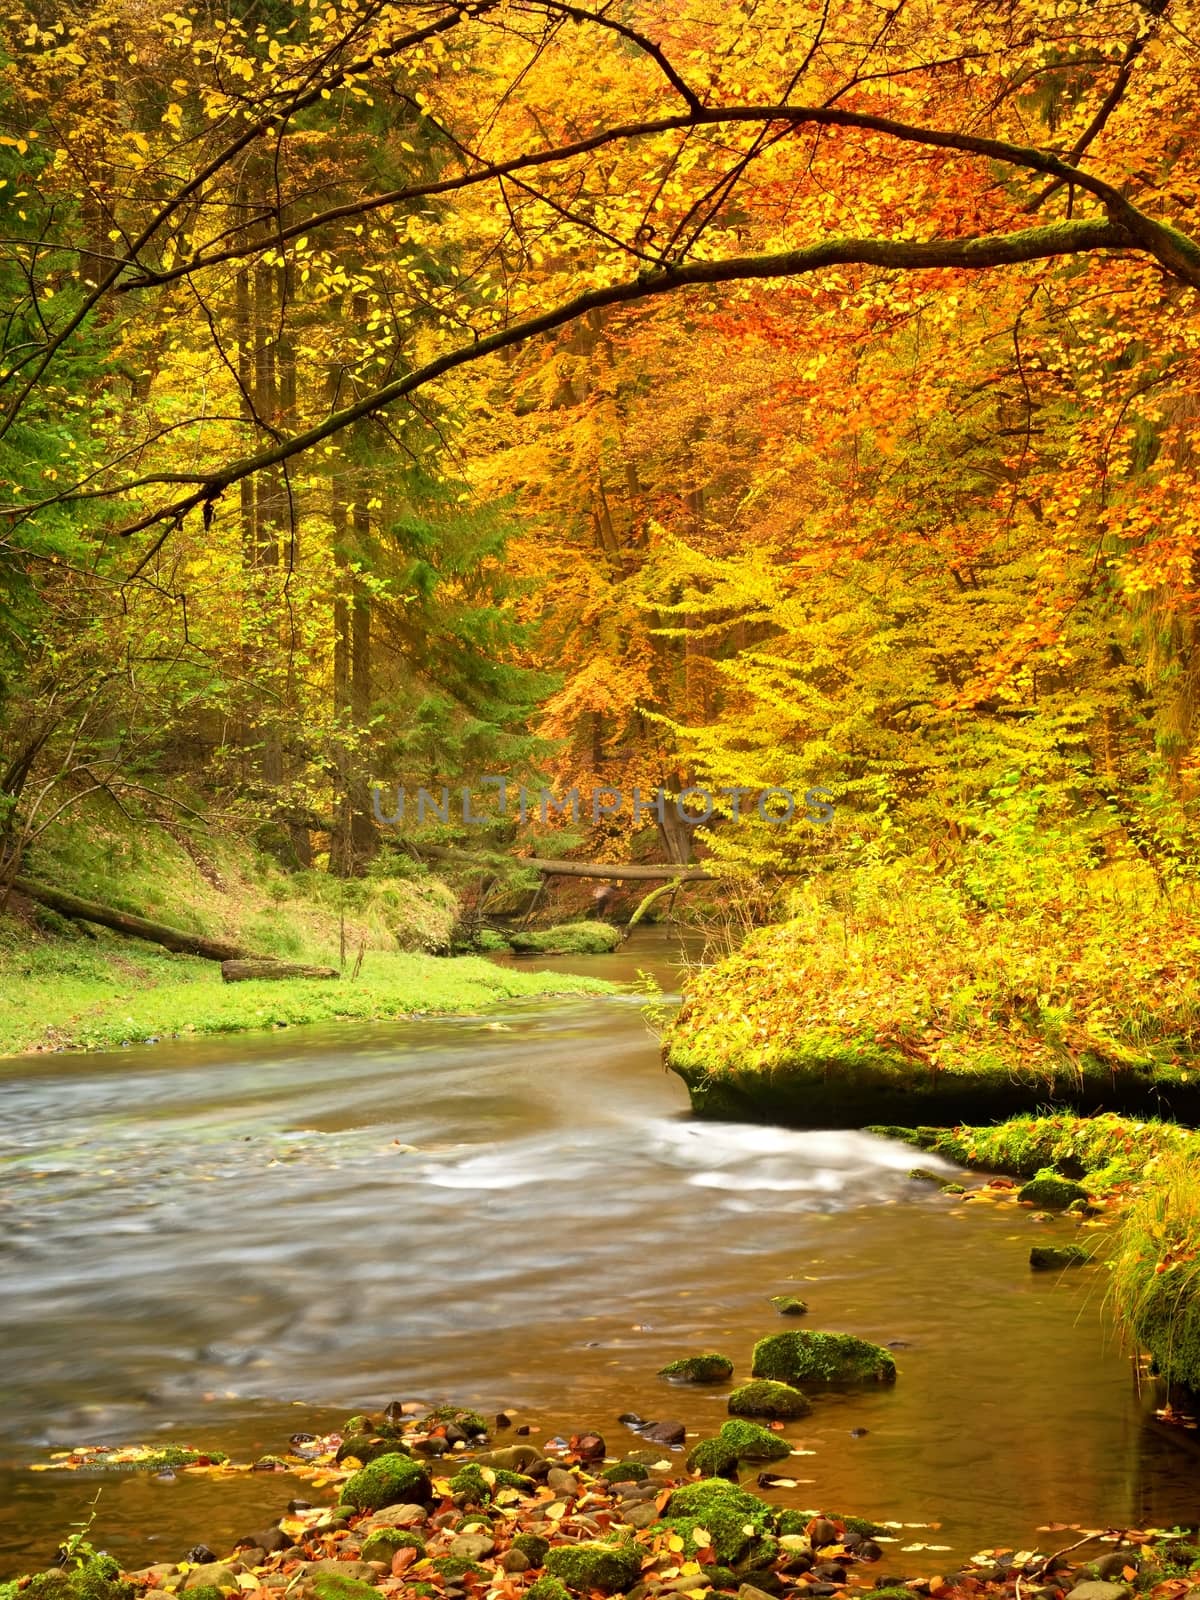 Autumn landscape, colorful leaves on trees, morning at river after rain. Fall season. Colorful leaves.  Forest river. Fall morning river. Autumnal nature.